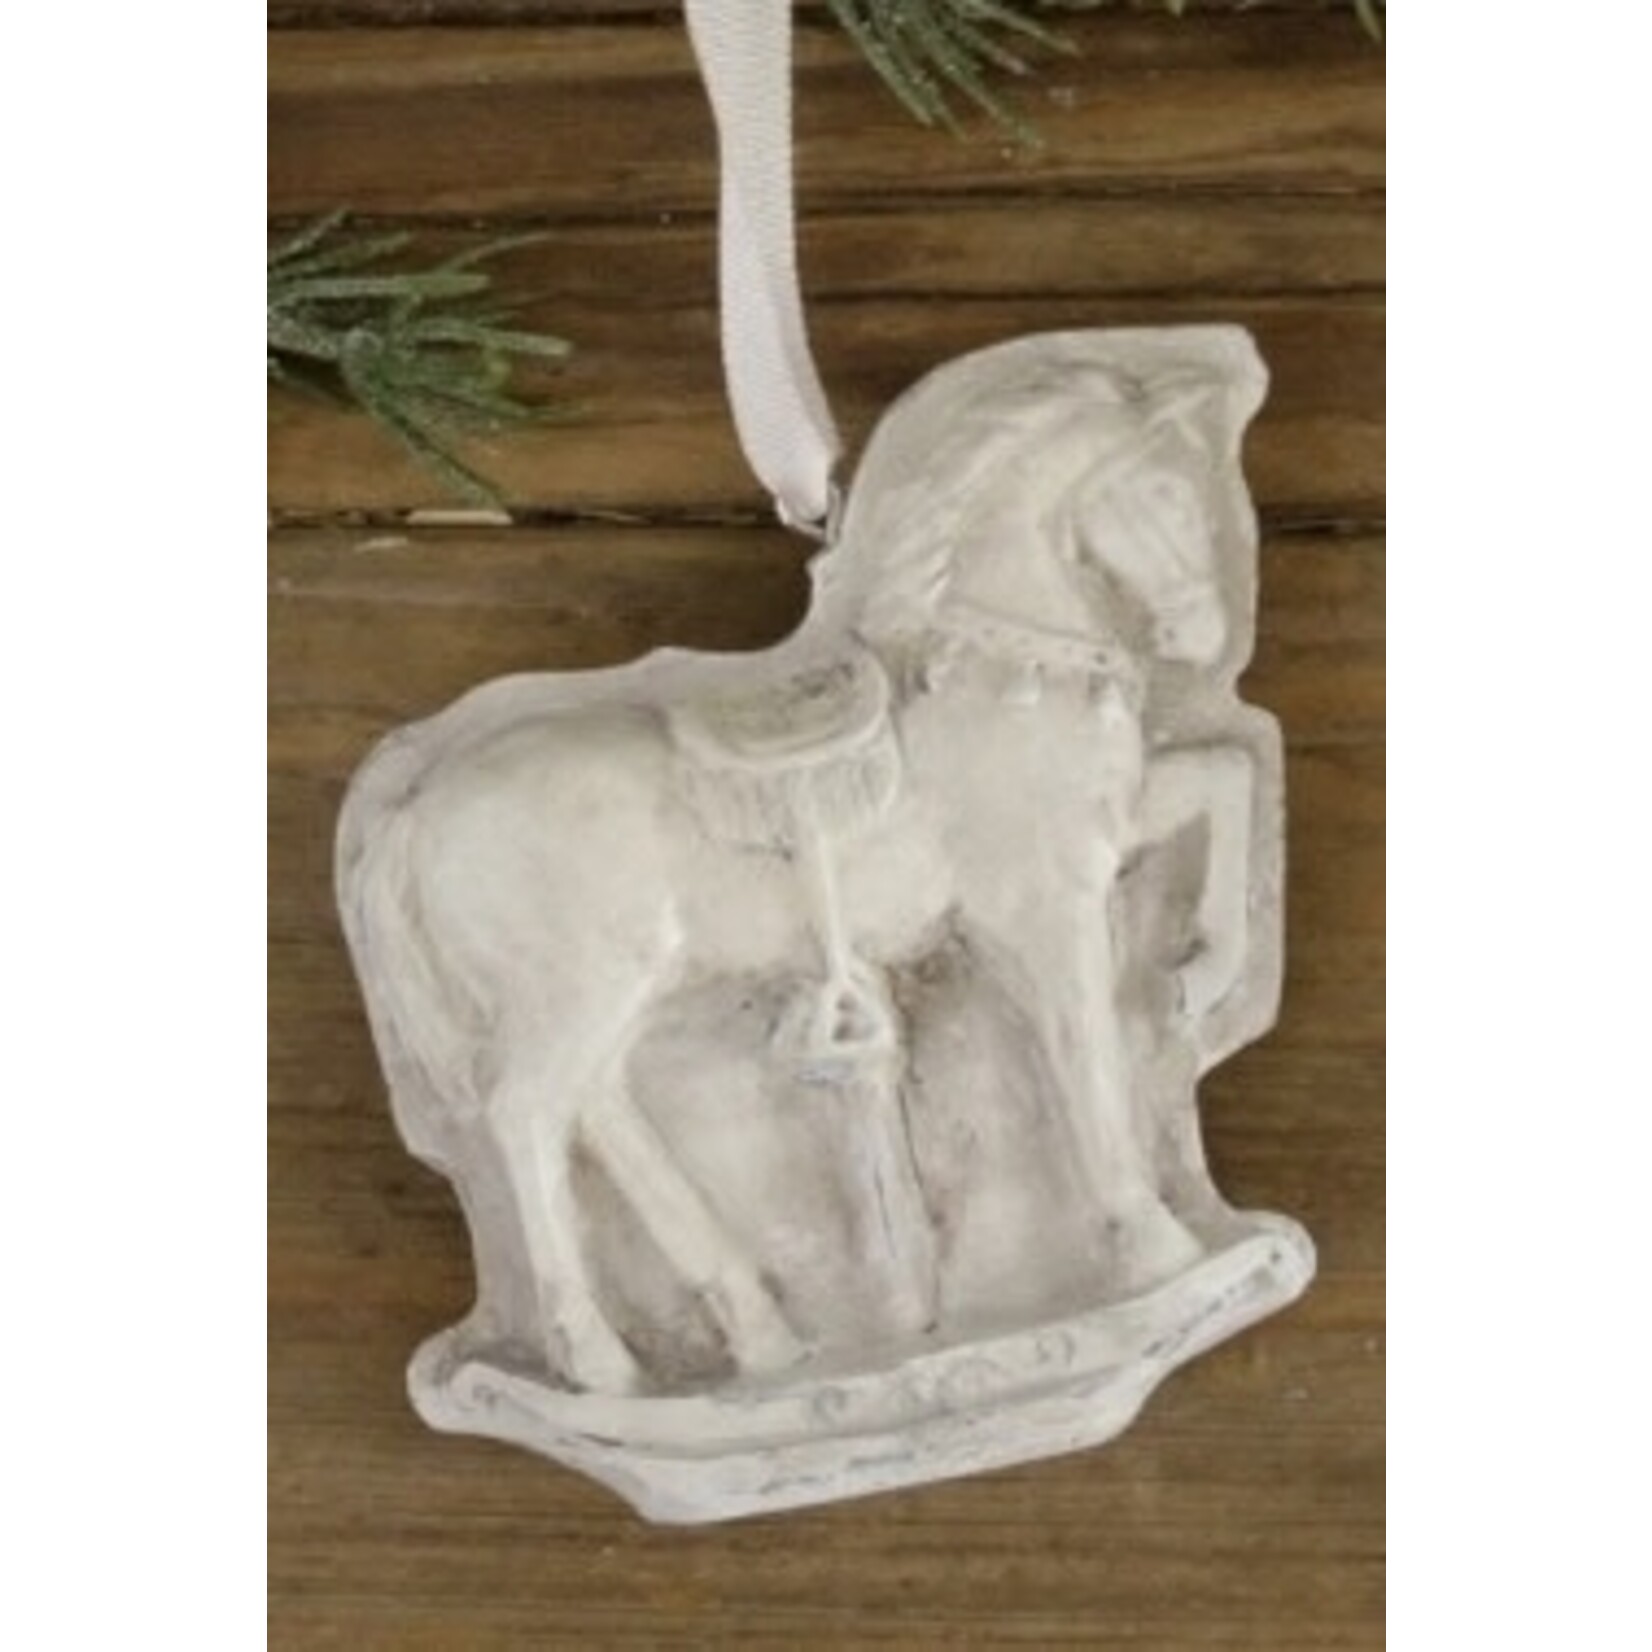 Audrey’s Christmas Mold Ornament Rocking Horse